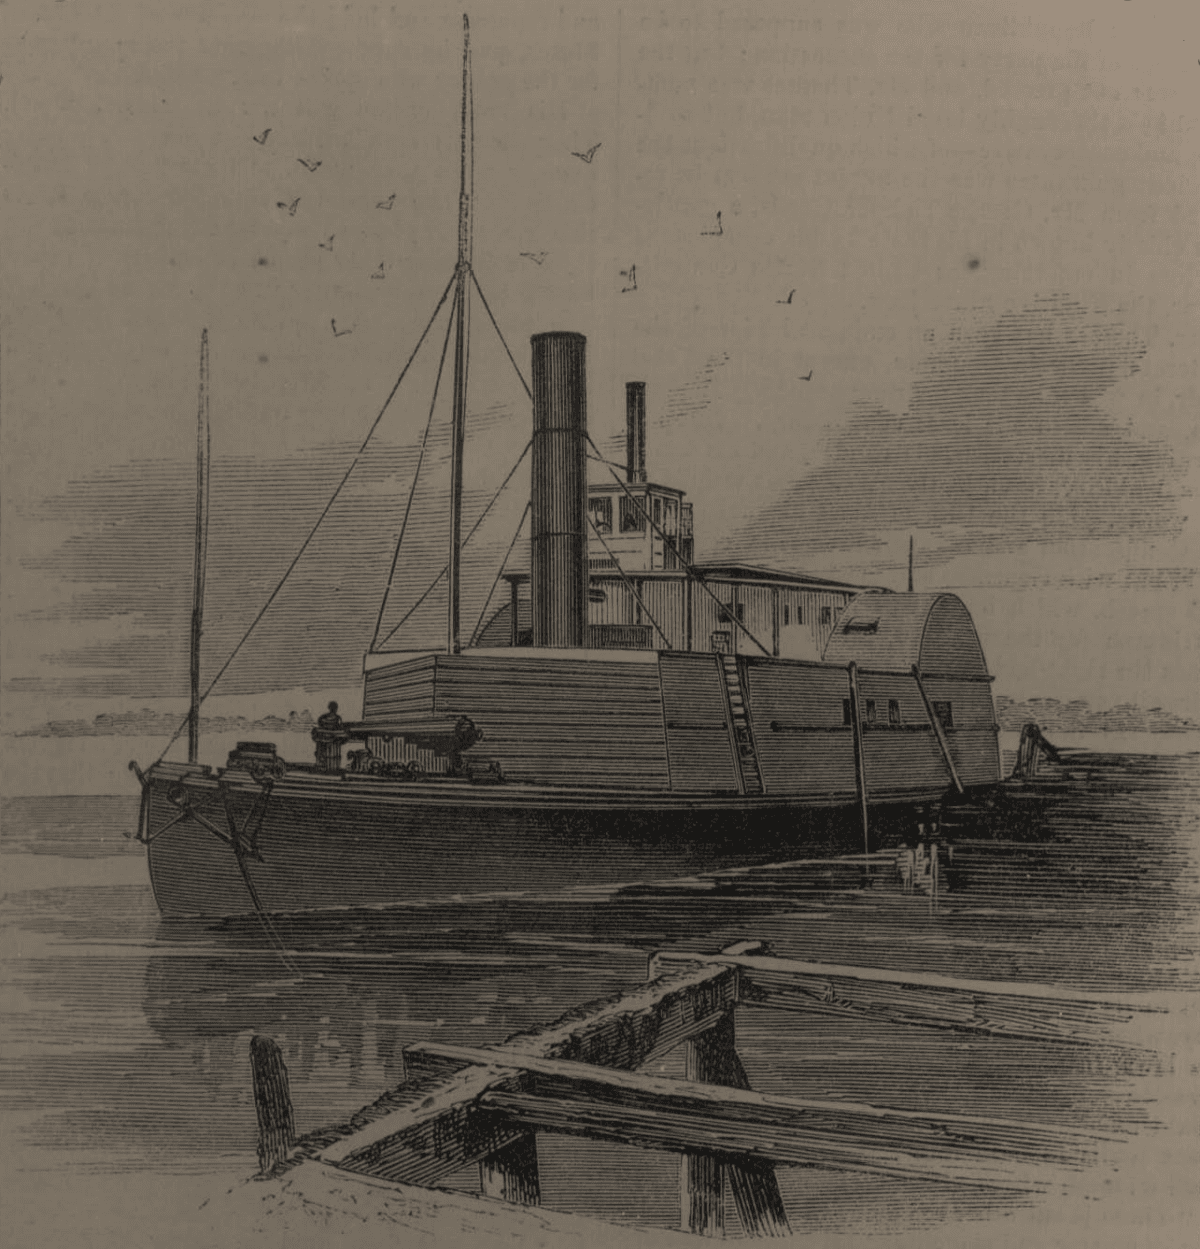 The confederate gun boat Planter that Robert Smalls surrendered to the Union forces in Charleston harbor. (Public Domain)